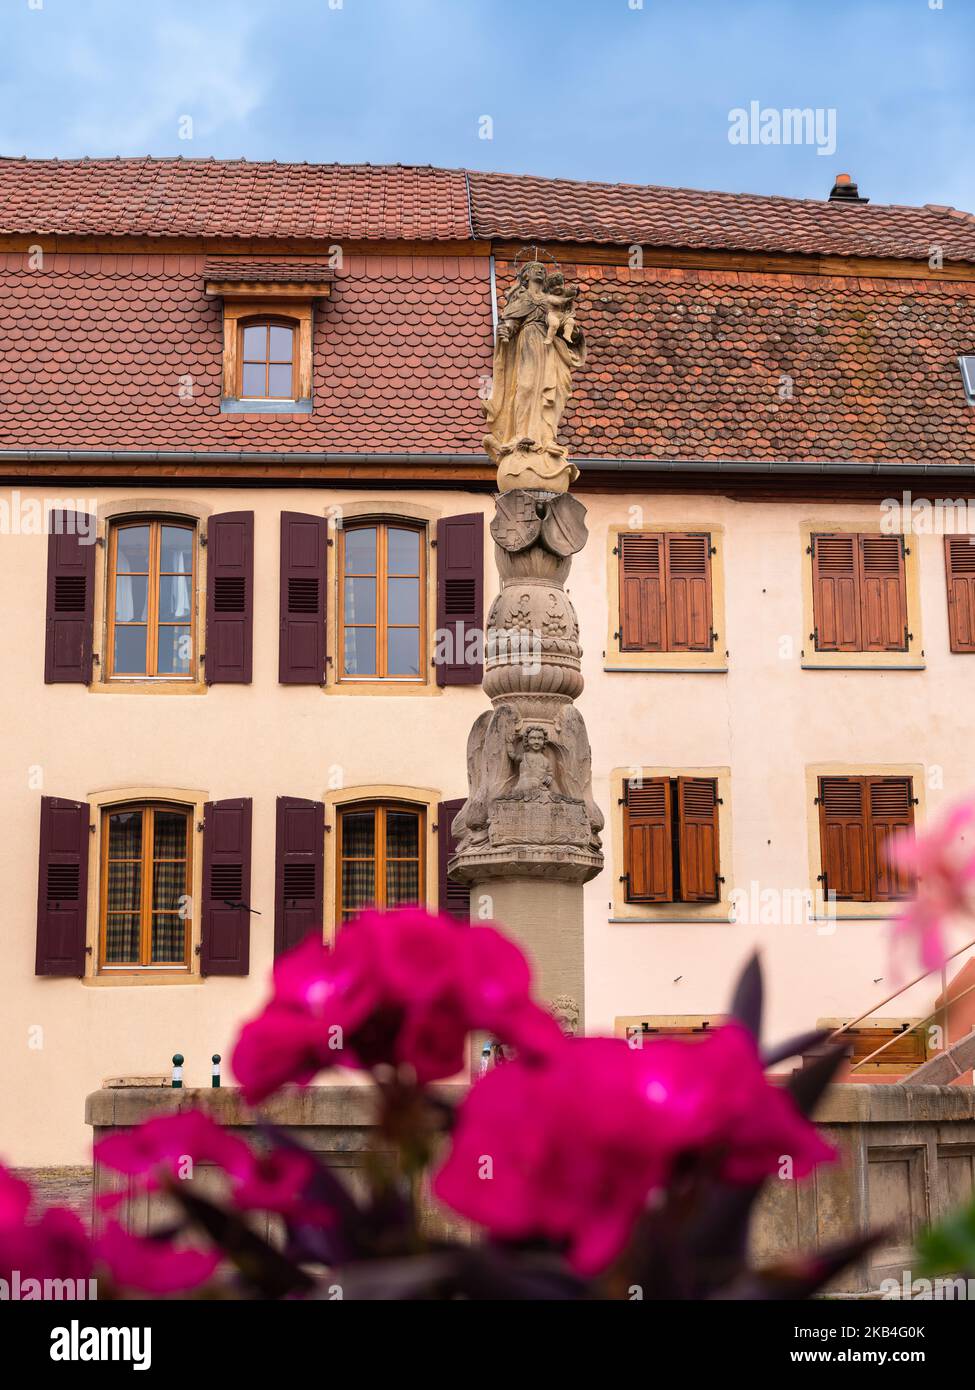 Rouffach, France - October 11, 2022: Medieval sculpture with a statue of Mary with Jesus in Rouffach, Alsace, France Stock Photo